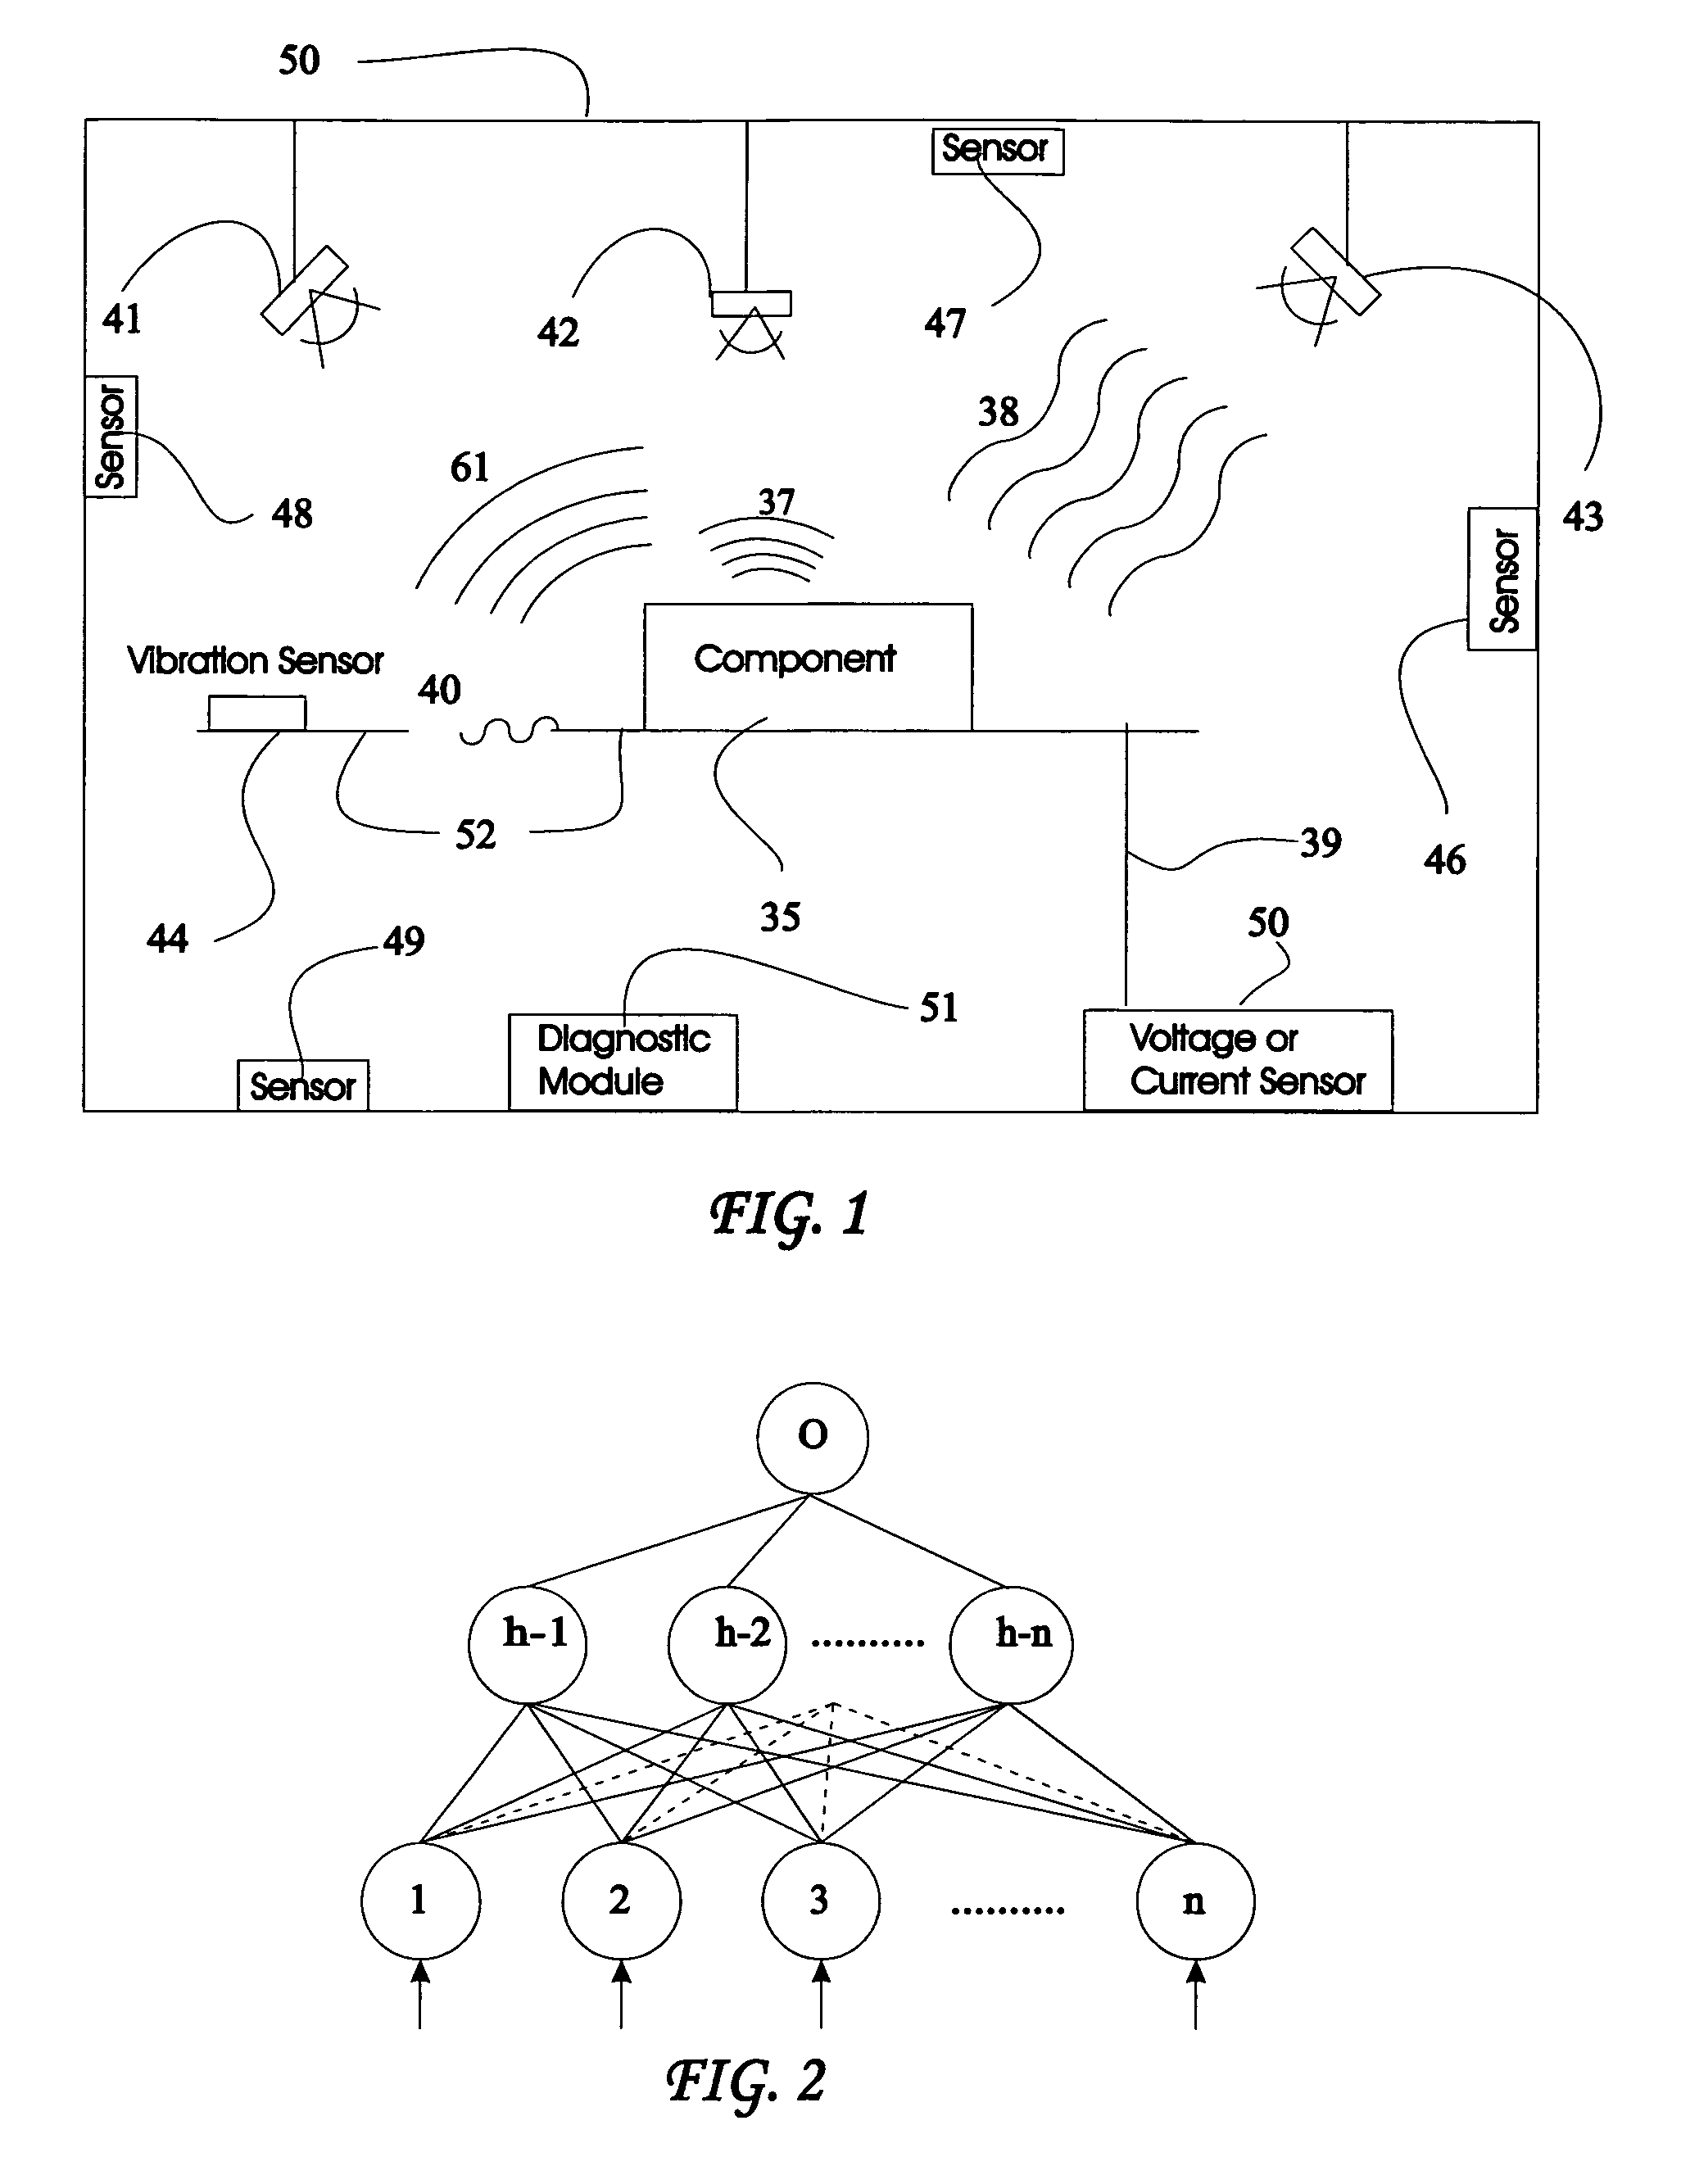 System and method for vehicle diagnostics